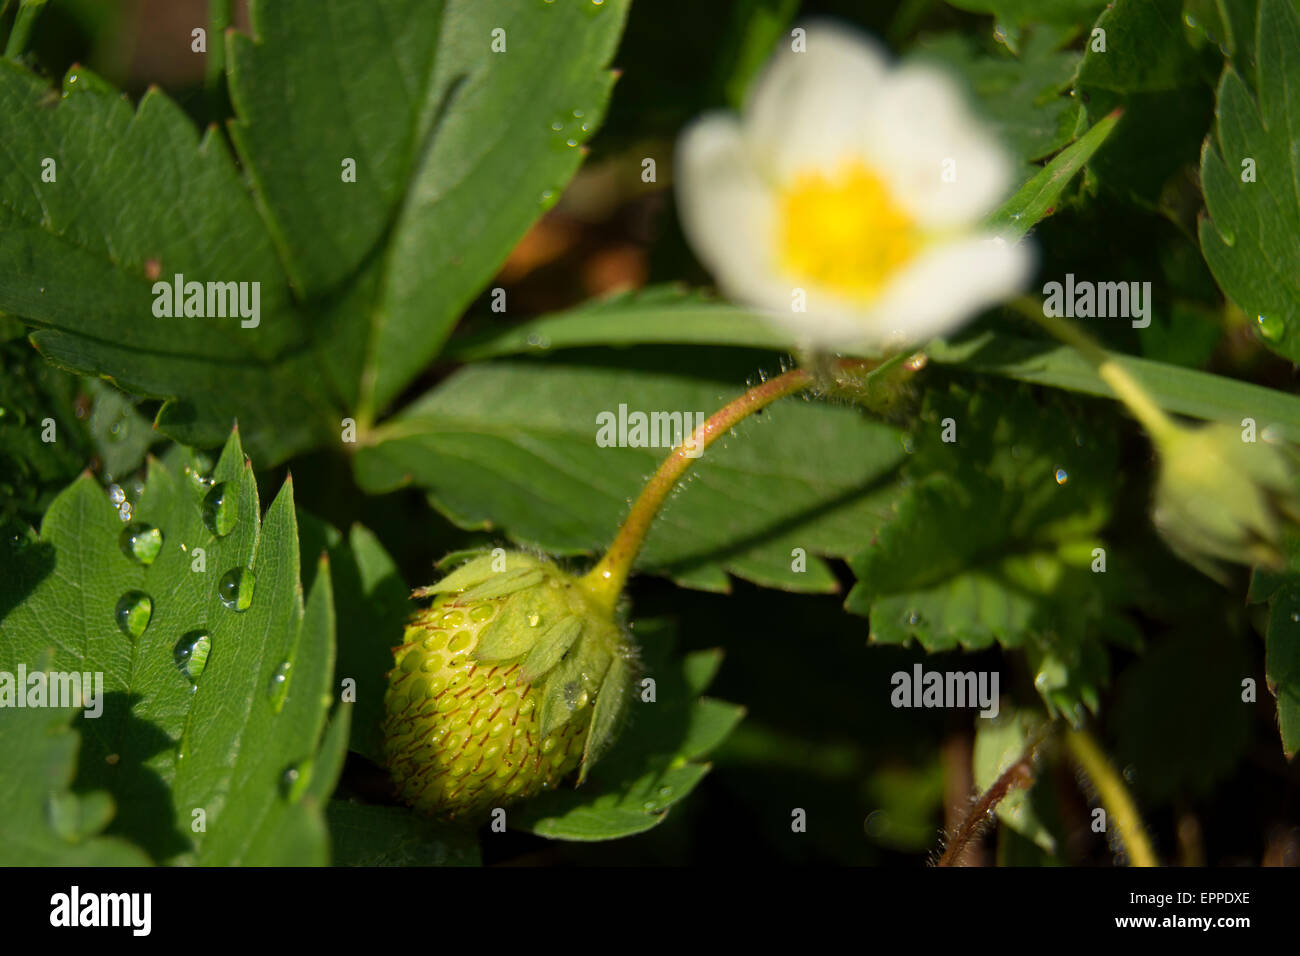 green strawberry with flower Stock Photo